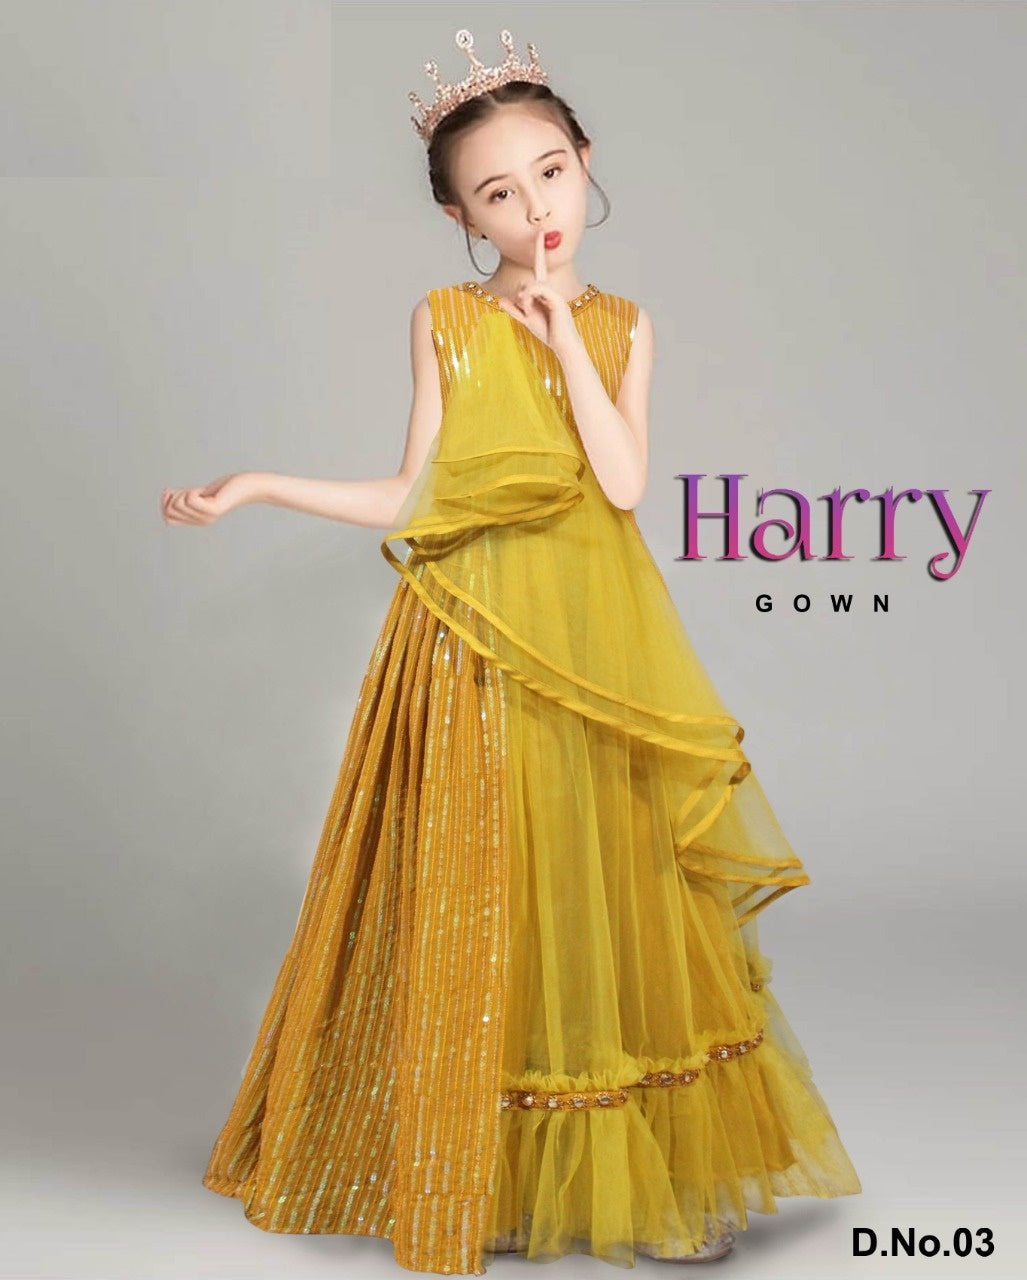 Designer Harry Children Kids Gwon Dno.03 Anant Tex Exports Private Limited